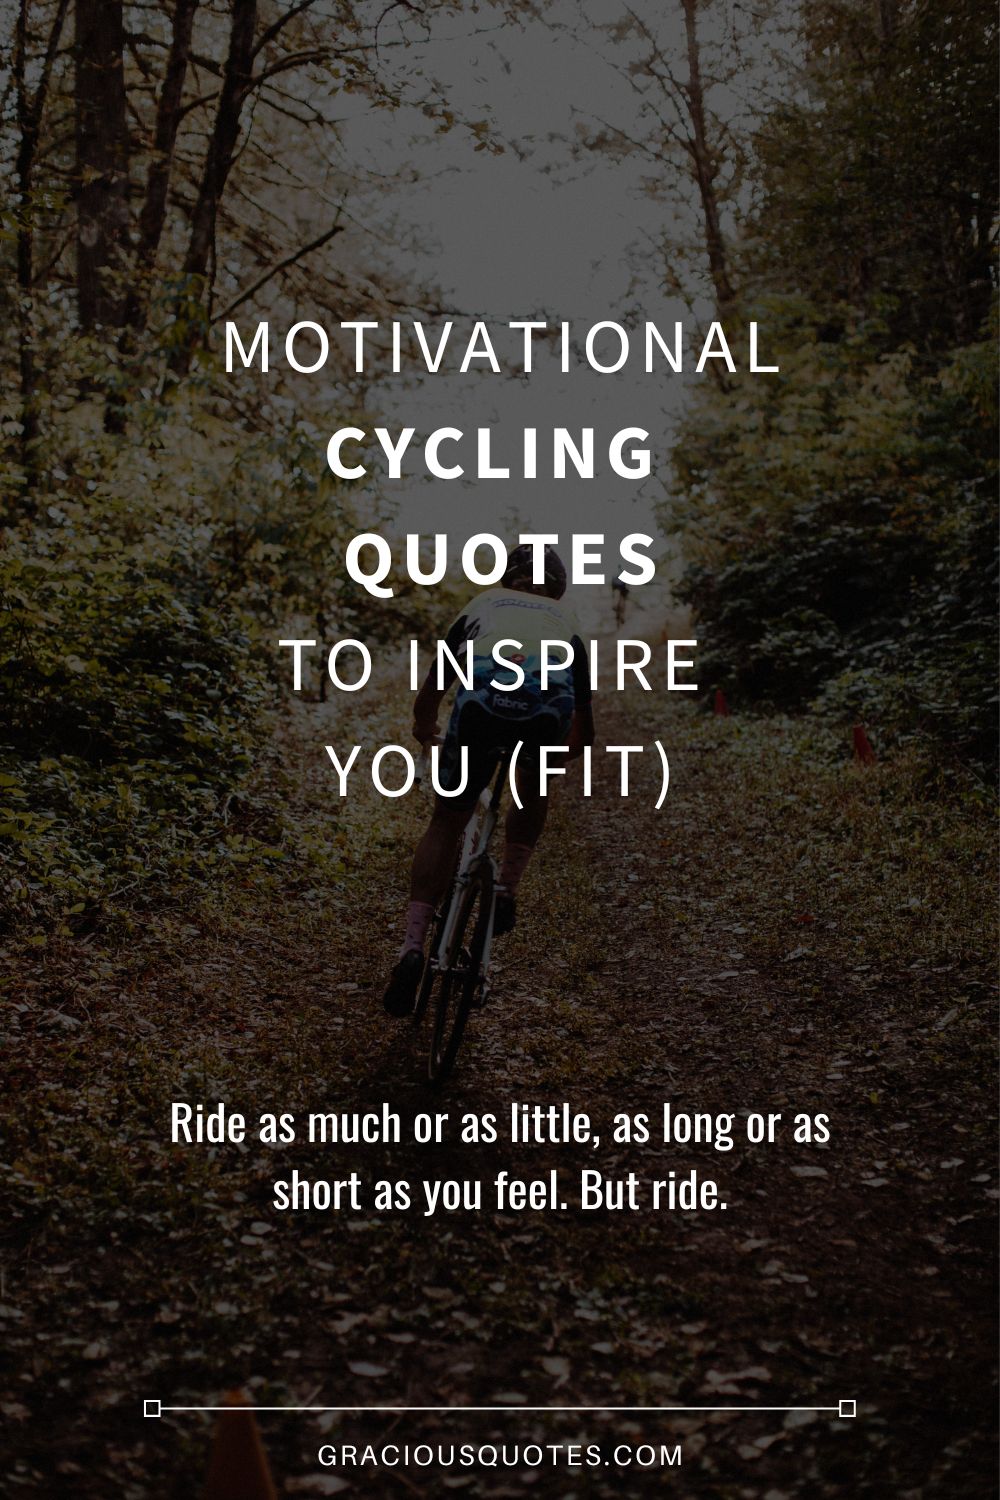 Motivational Cycling Quotes to Inspire you (FIT) - Gracious Quotes